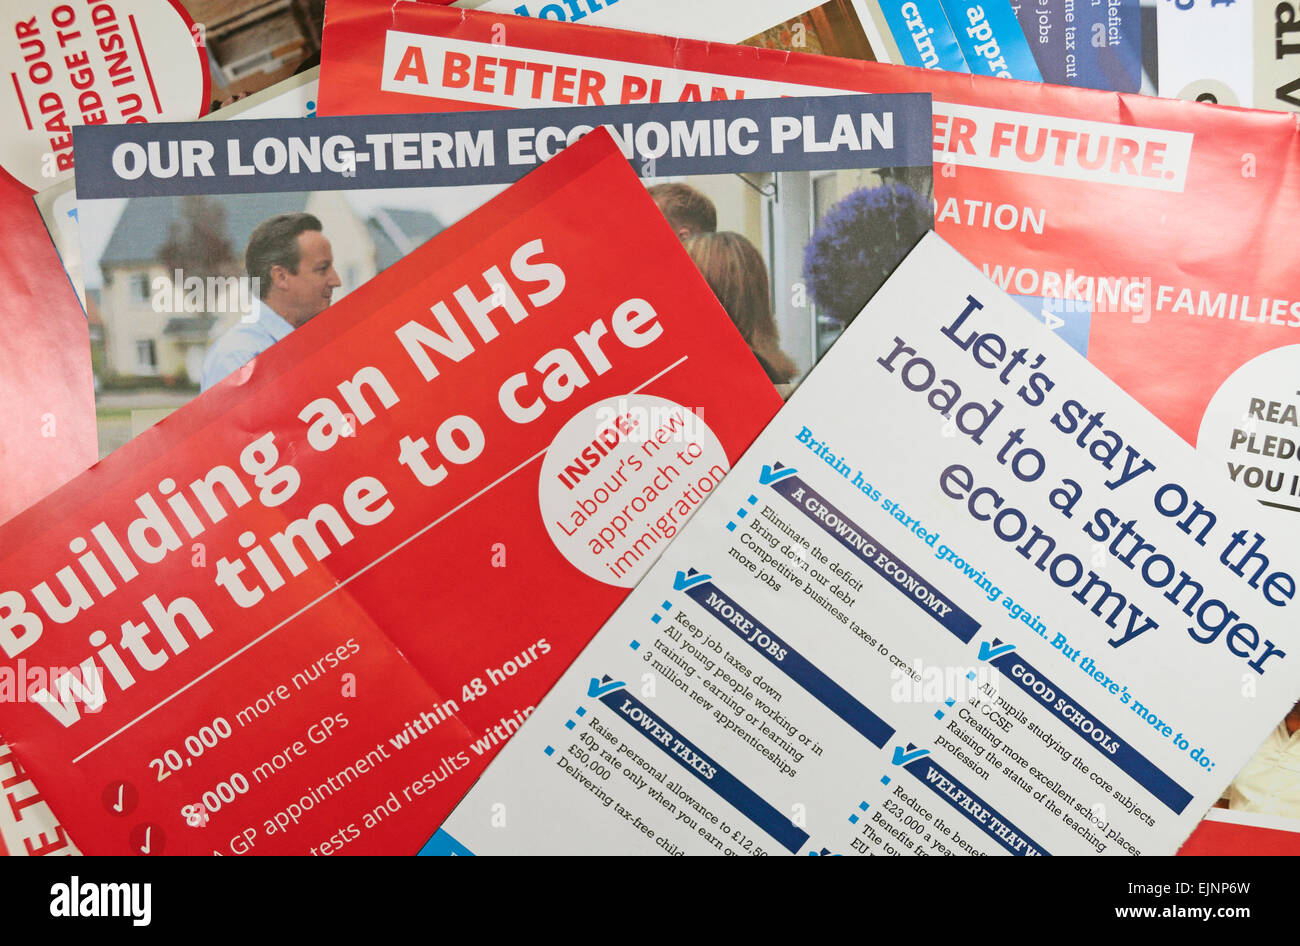 UK General Election 2015 literature received before the election campaign has officially begun on 30th March 2015. Stock Photo